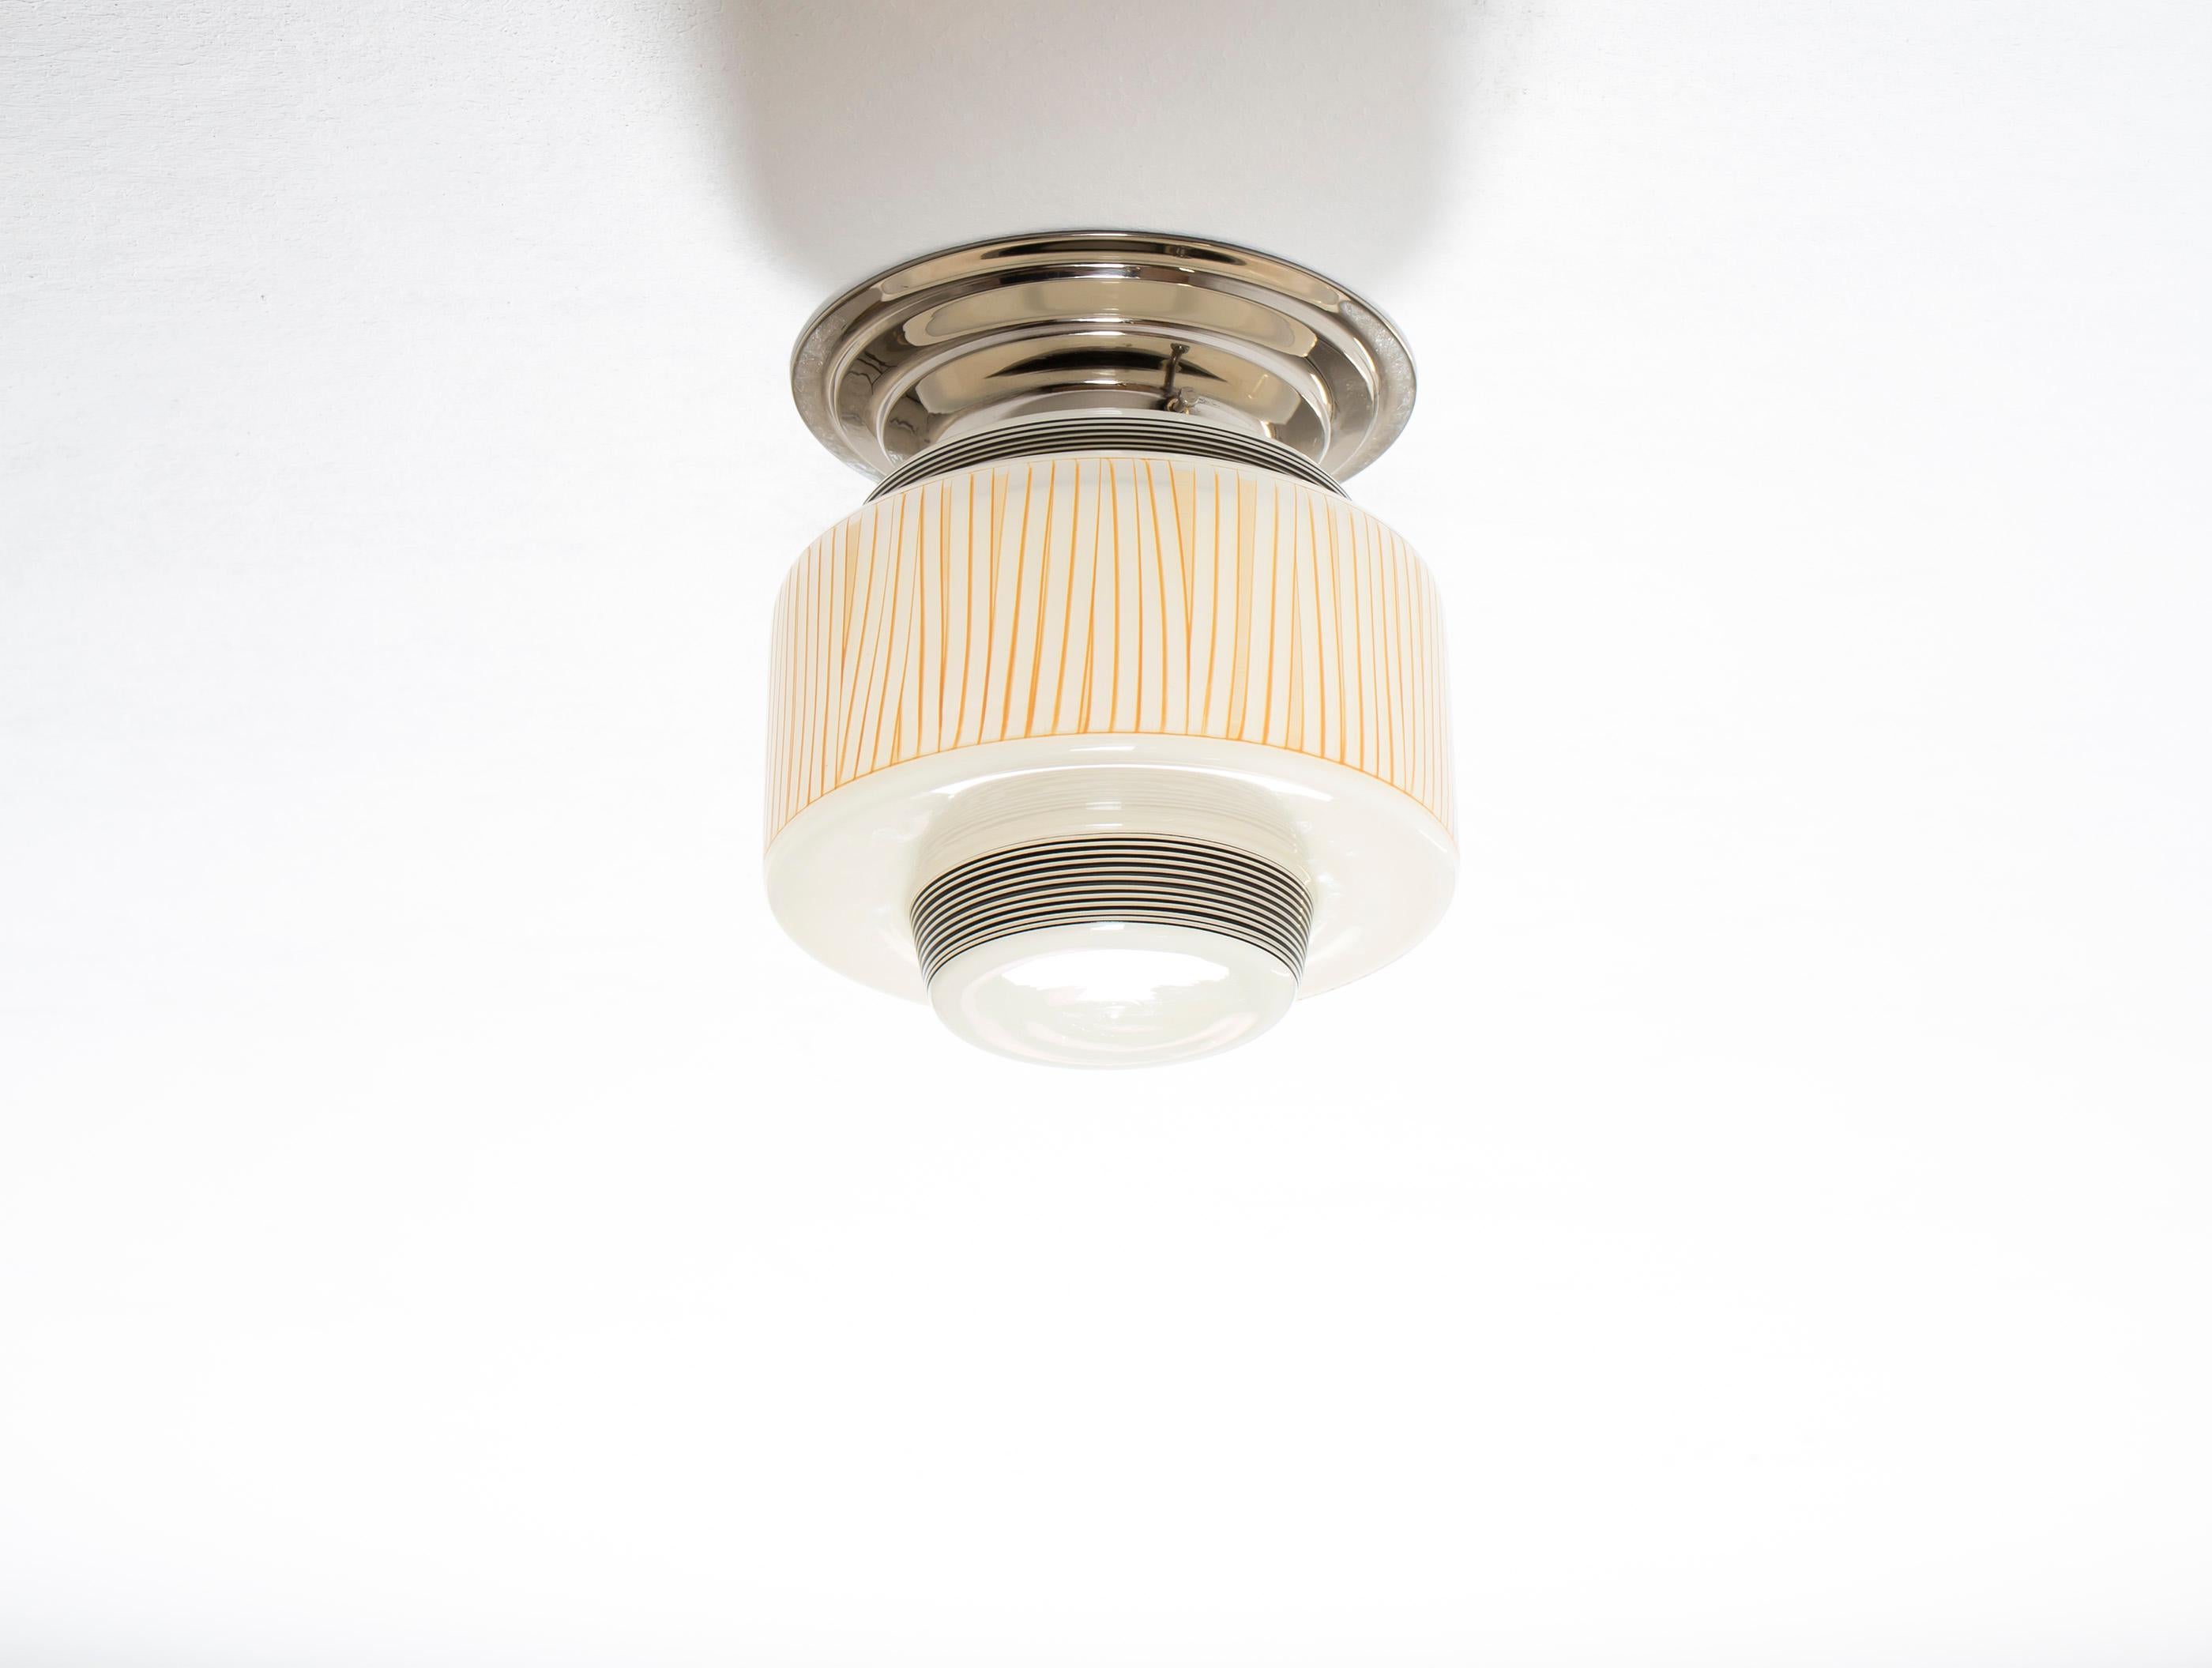 Norwegian Flush Mount Ceiling Light, 1950s In Good Condition For Sale In Oslo, NO